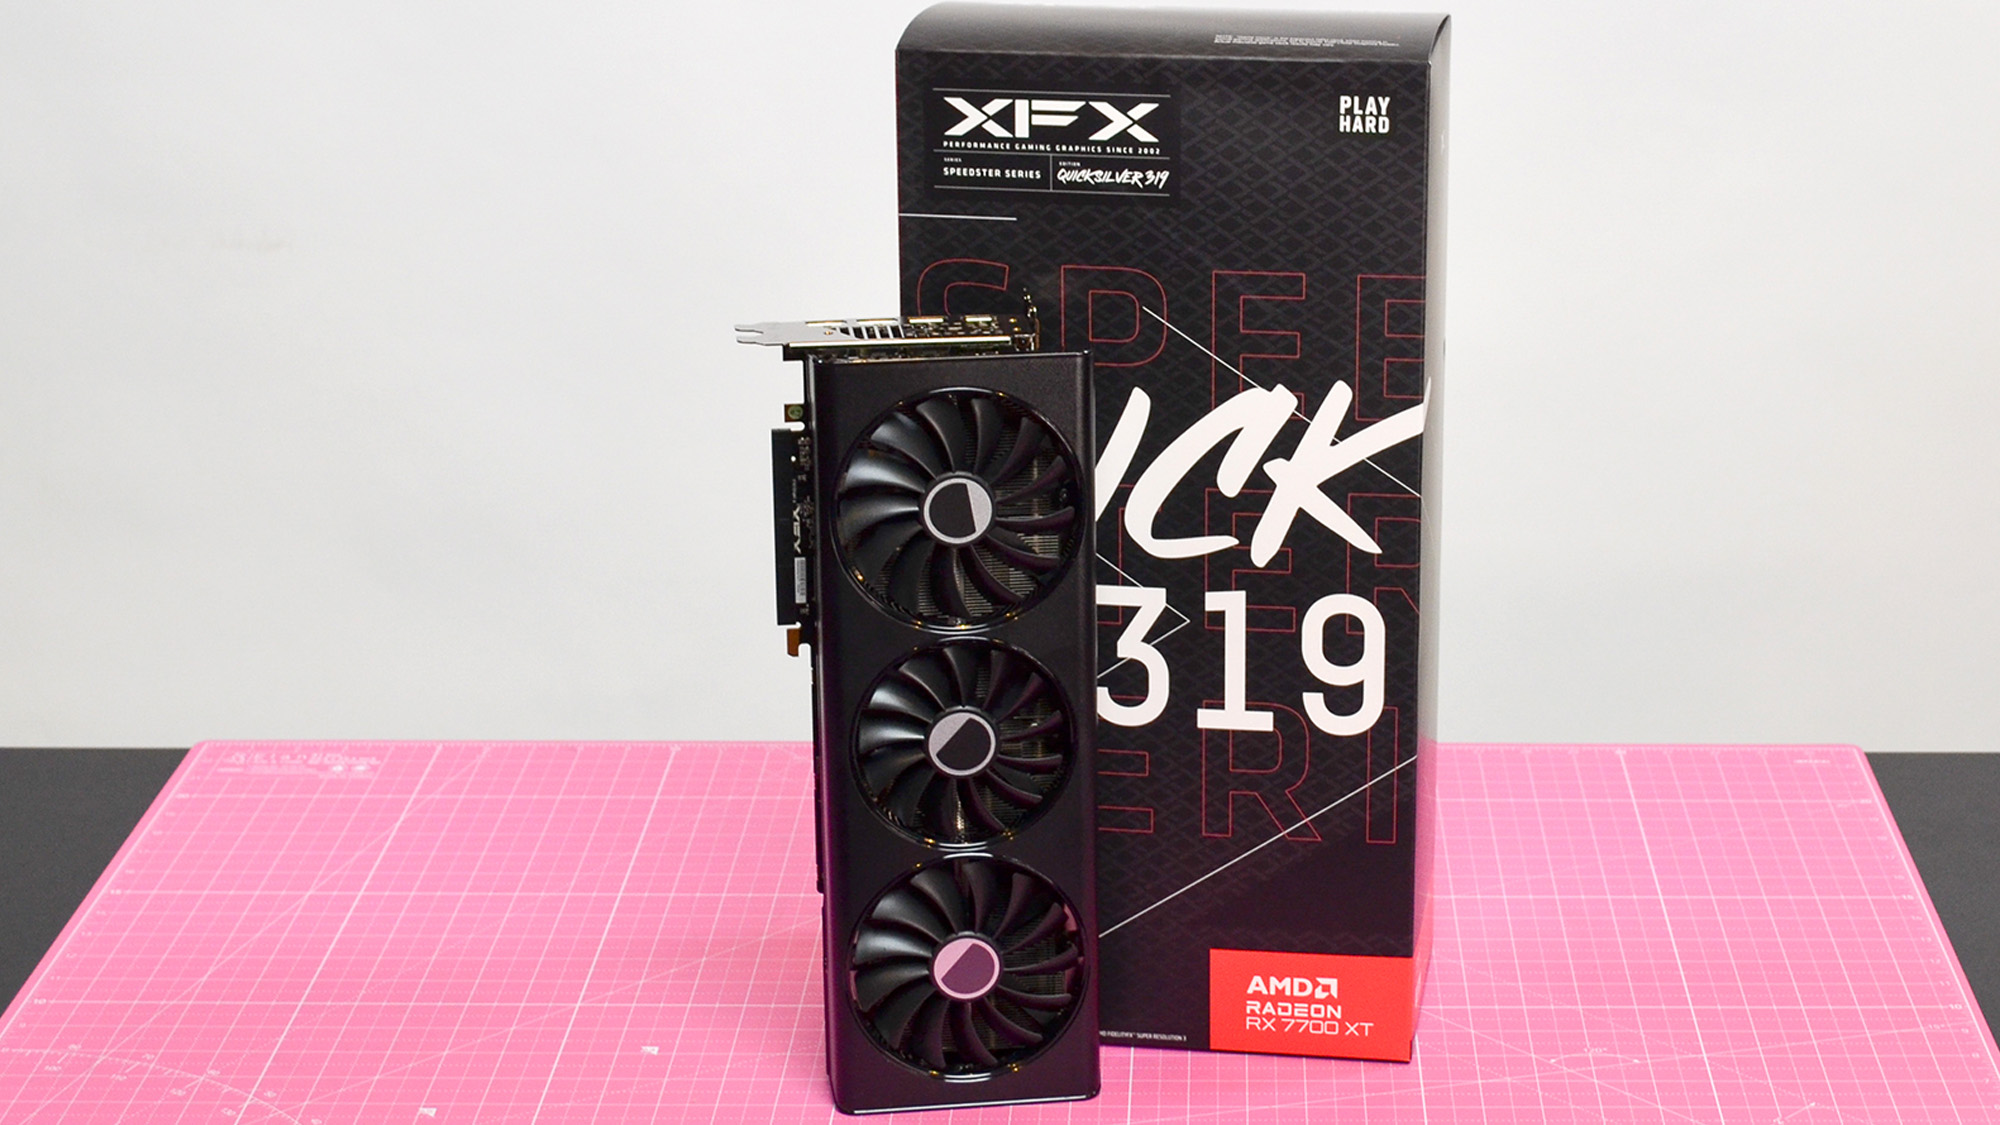 AMD Radeon RX 7700 XT review: worth the wait, but its price is iffy